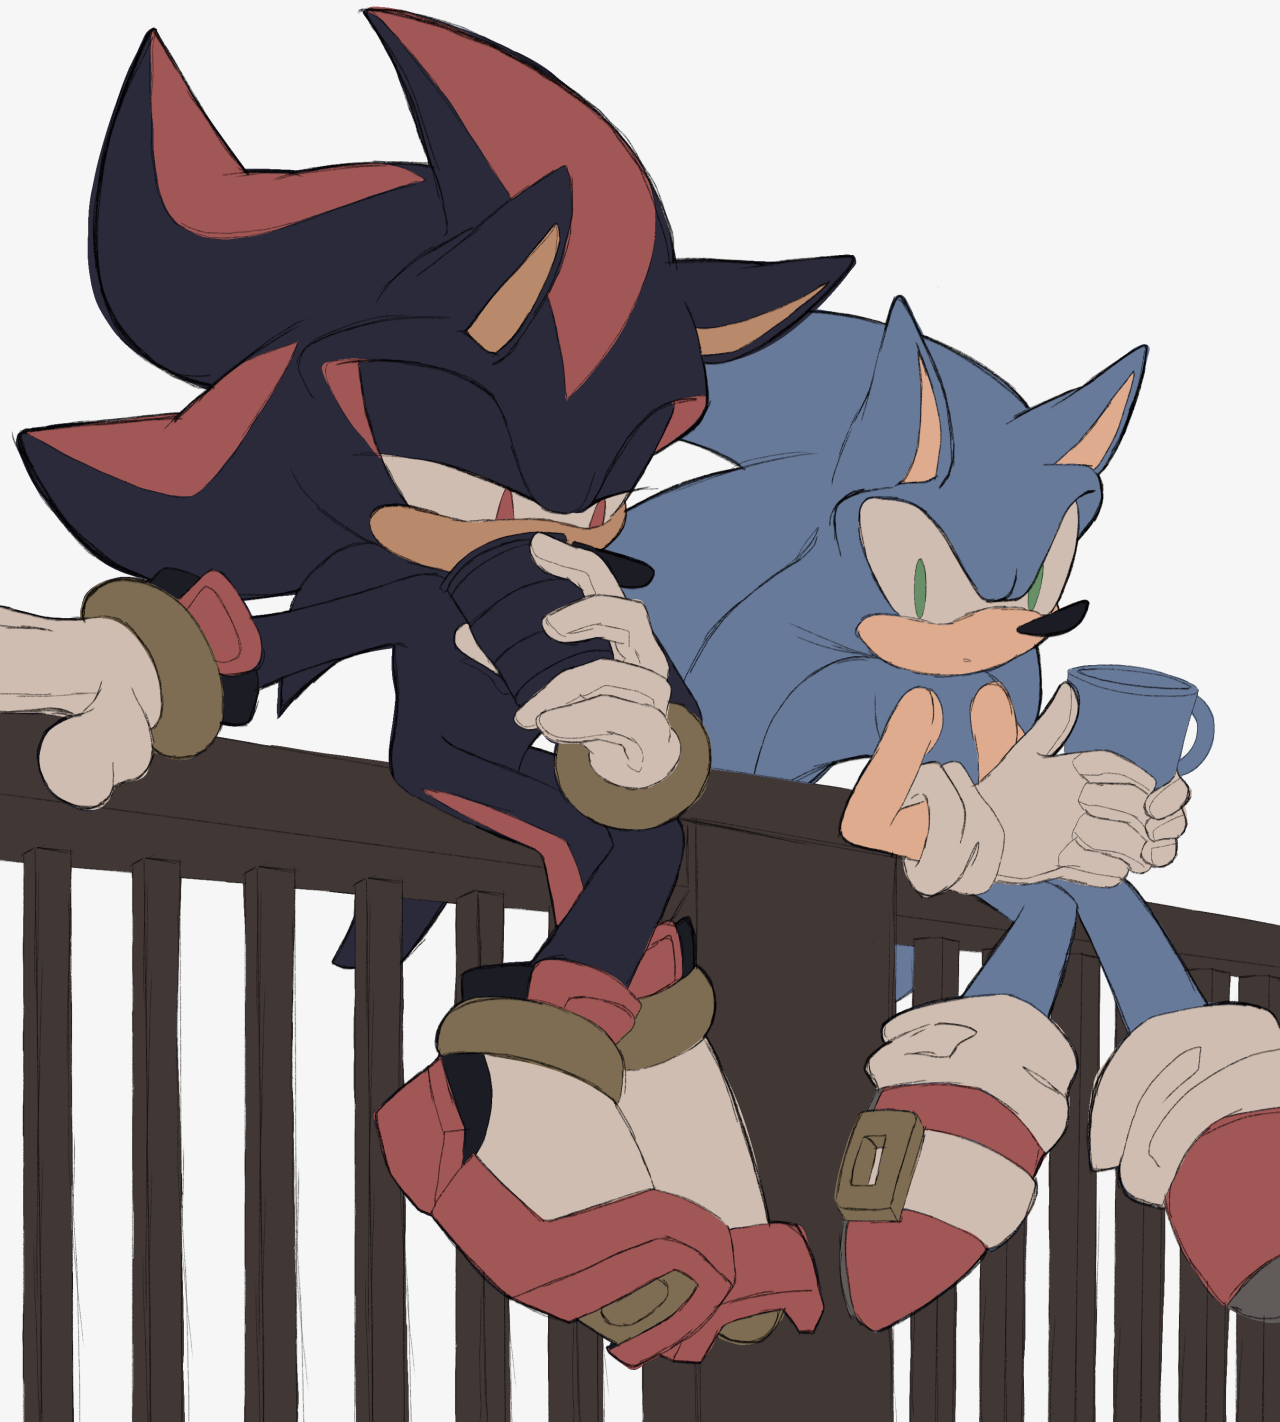 I came here for the gay hedgehogs — This is just a headcanon that